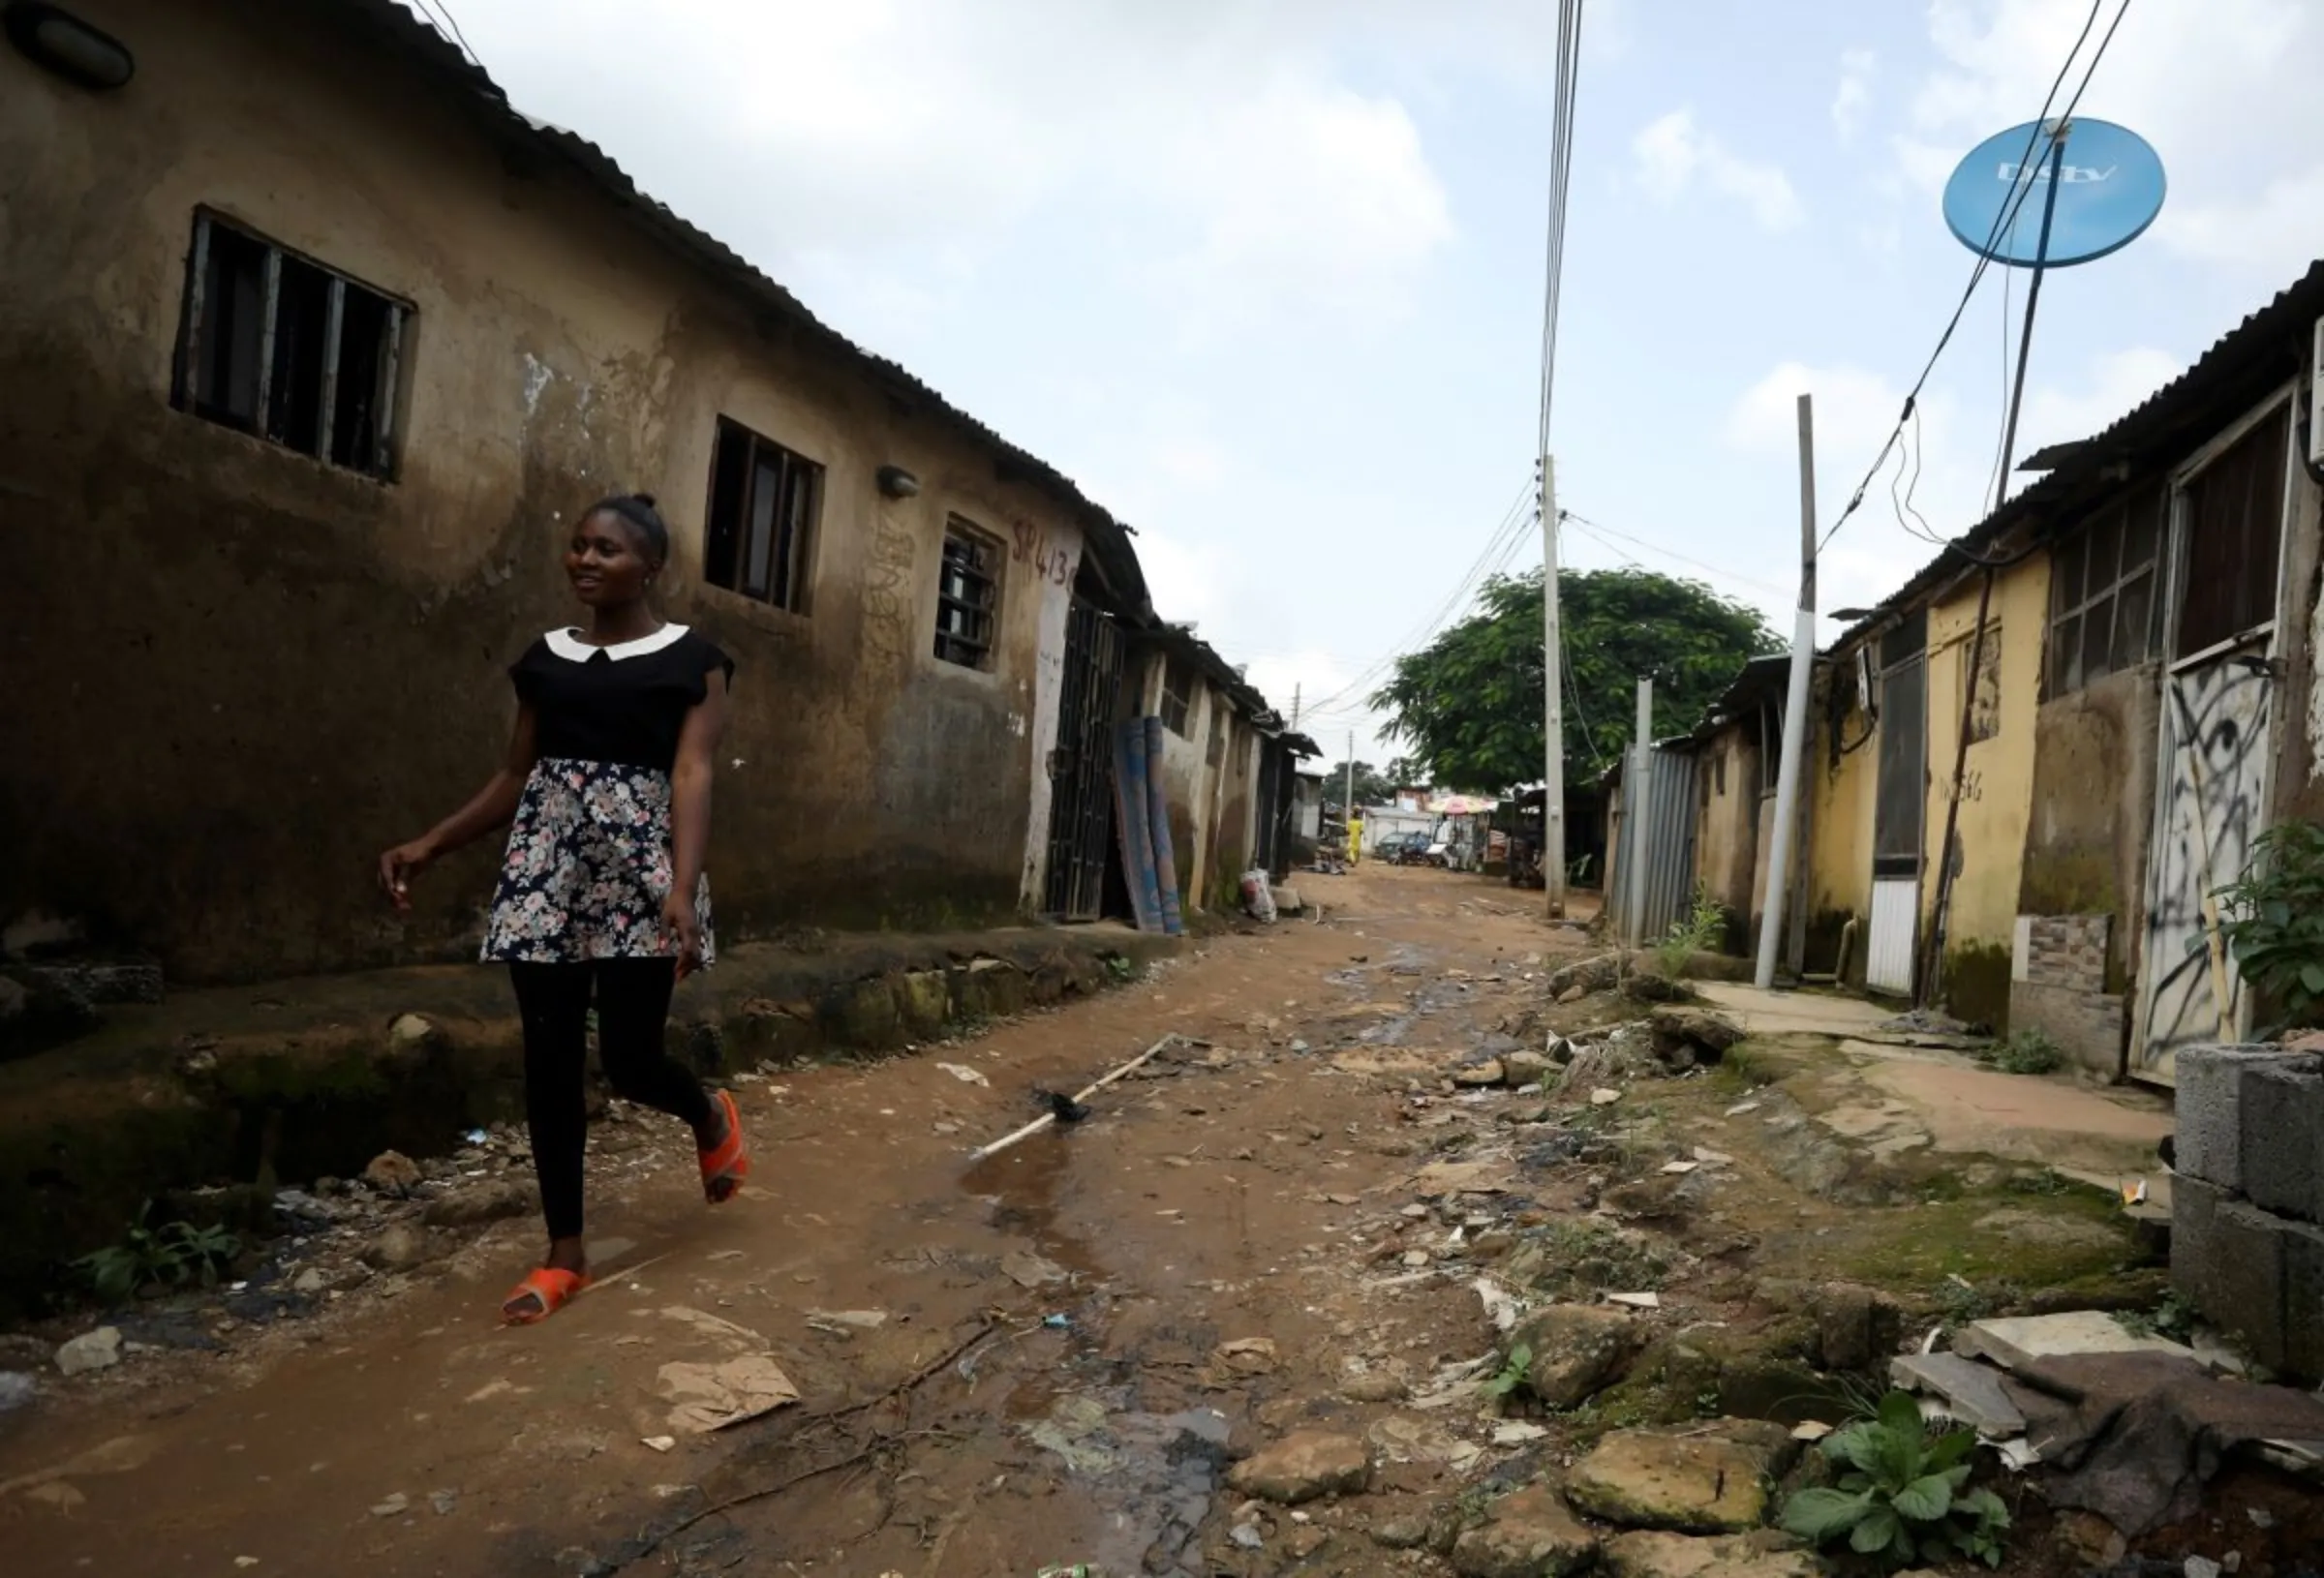 Nigeria's slum lords evict the poorest as rents soar